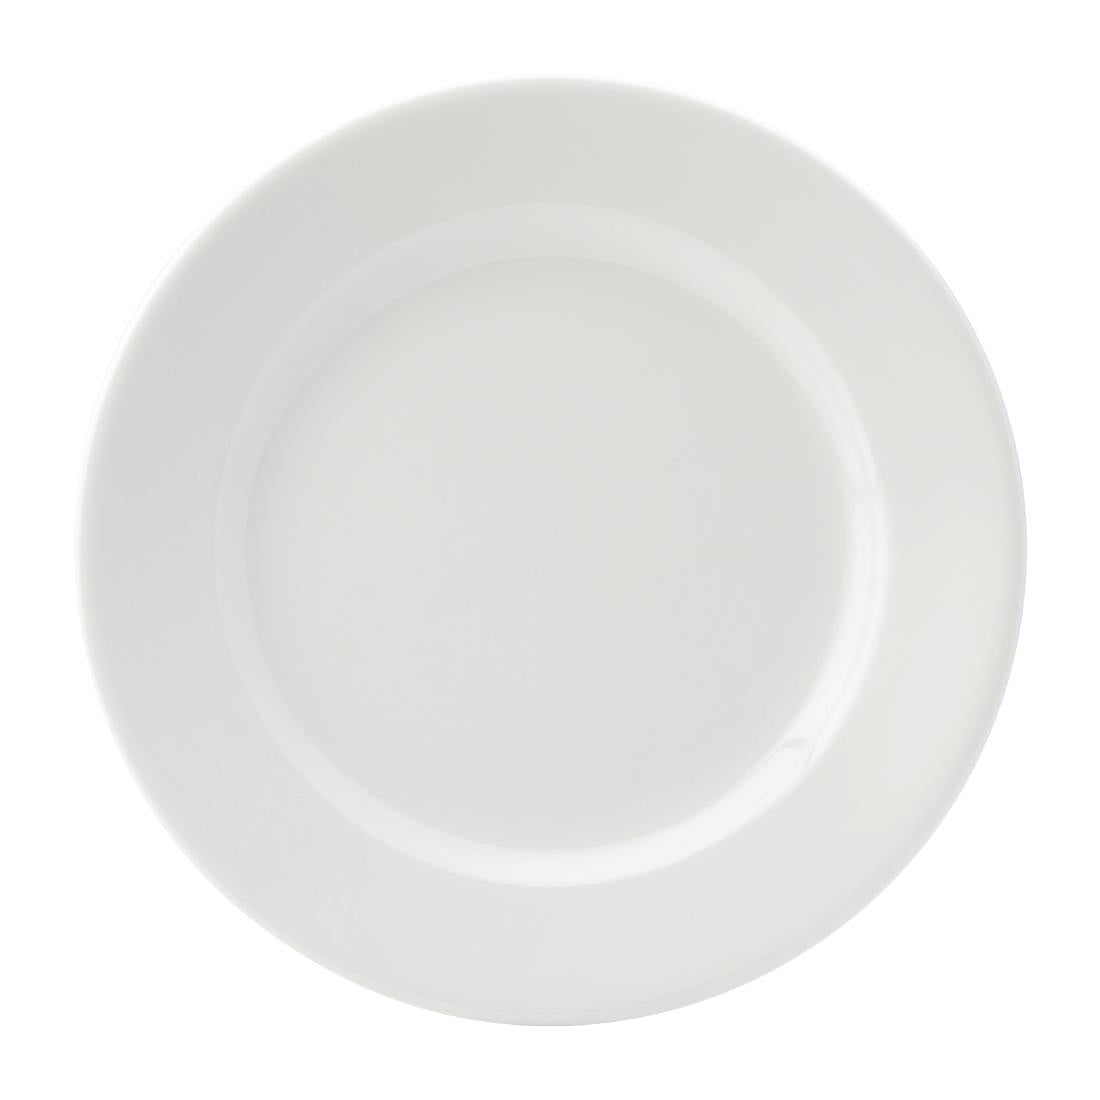 DY343 Utopia Titan Winged Plates White 230mm (Pack of 24)